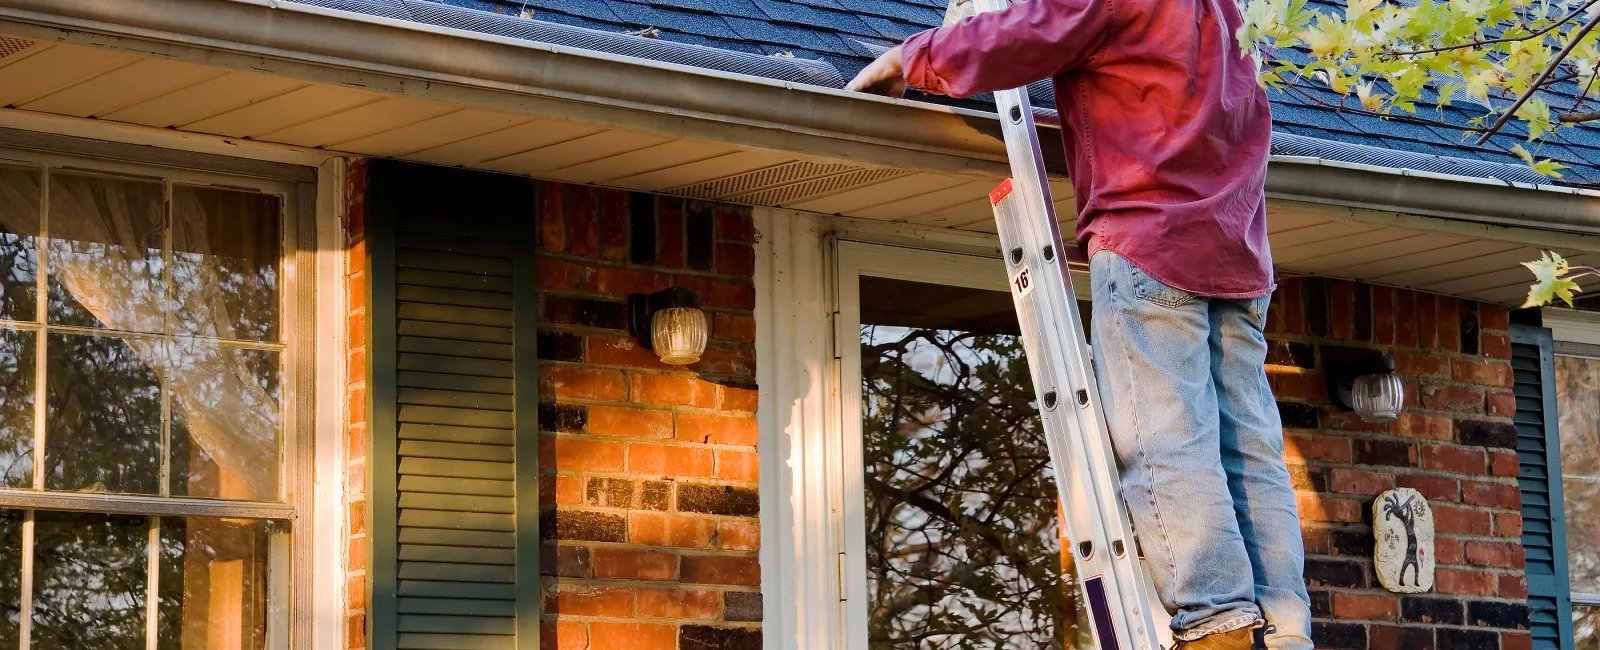 Cleaning and Maintaining Gutters